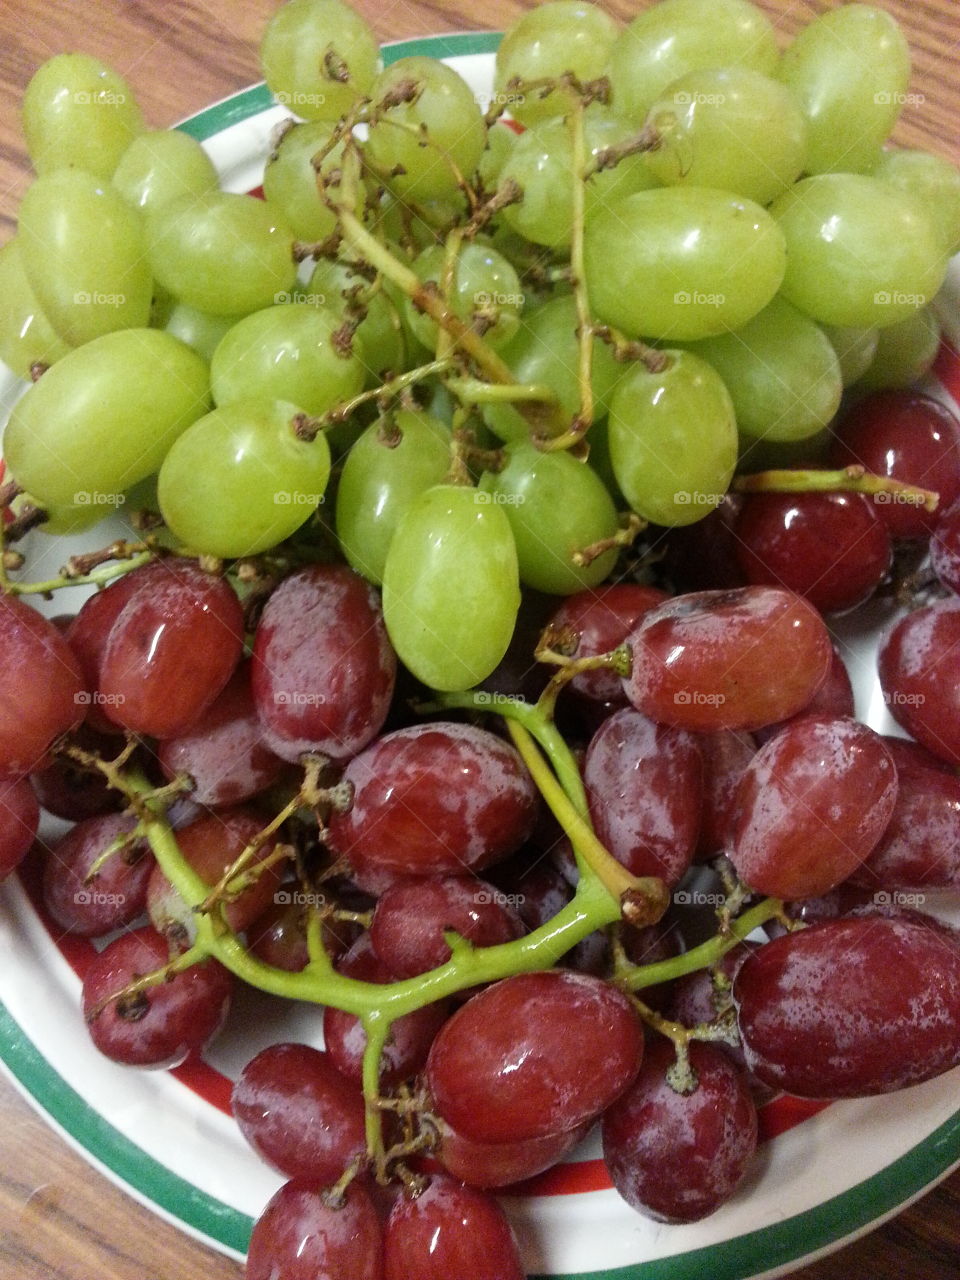 Grapes. a bowl of grapes on my table